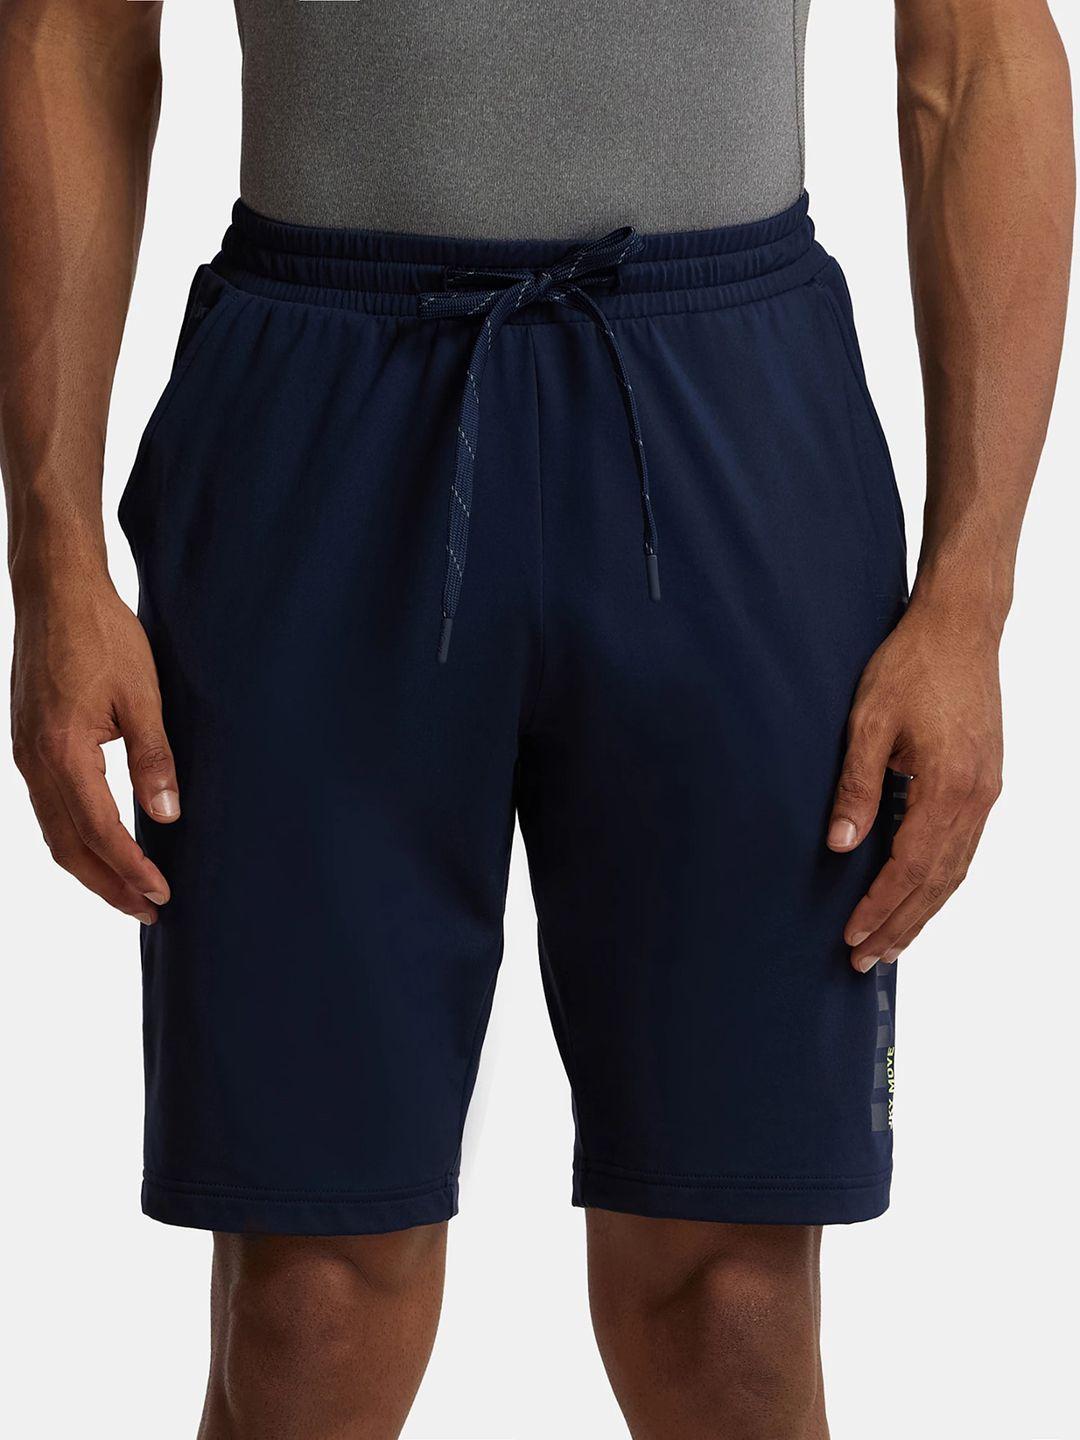 jockey-men-training-or-gym-sports-shorts-with-antimicrobial-technology